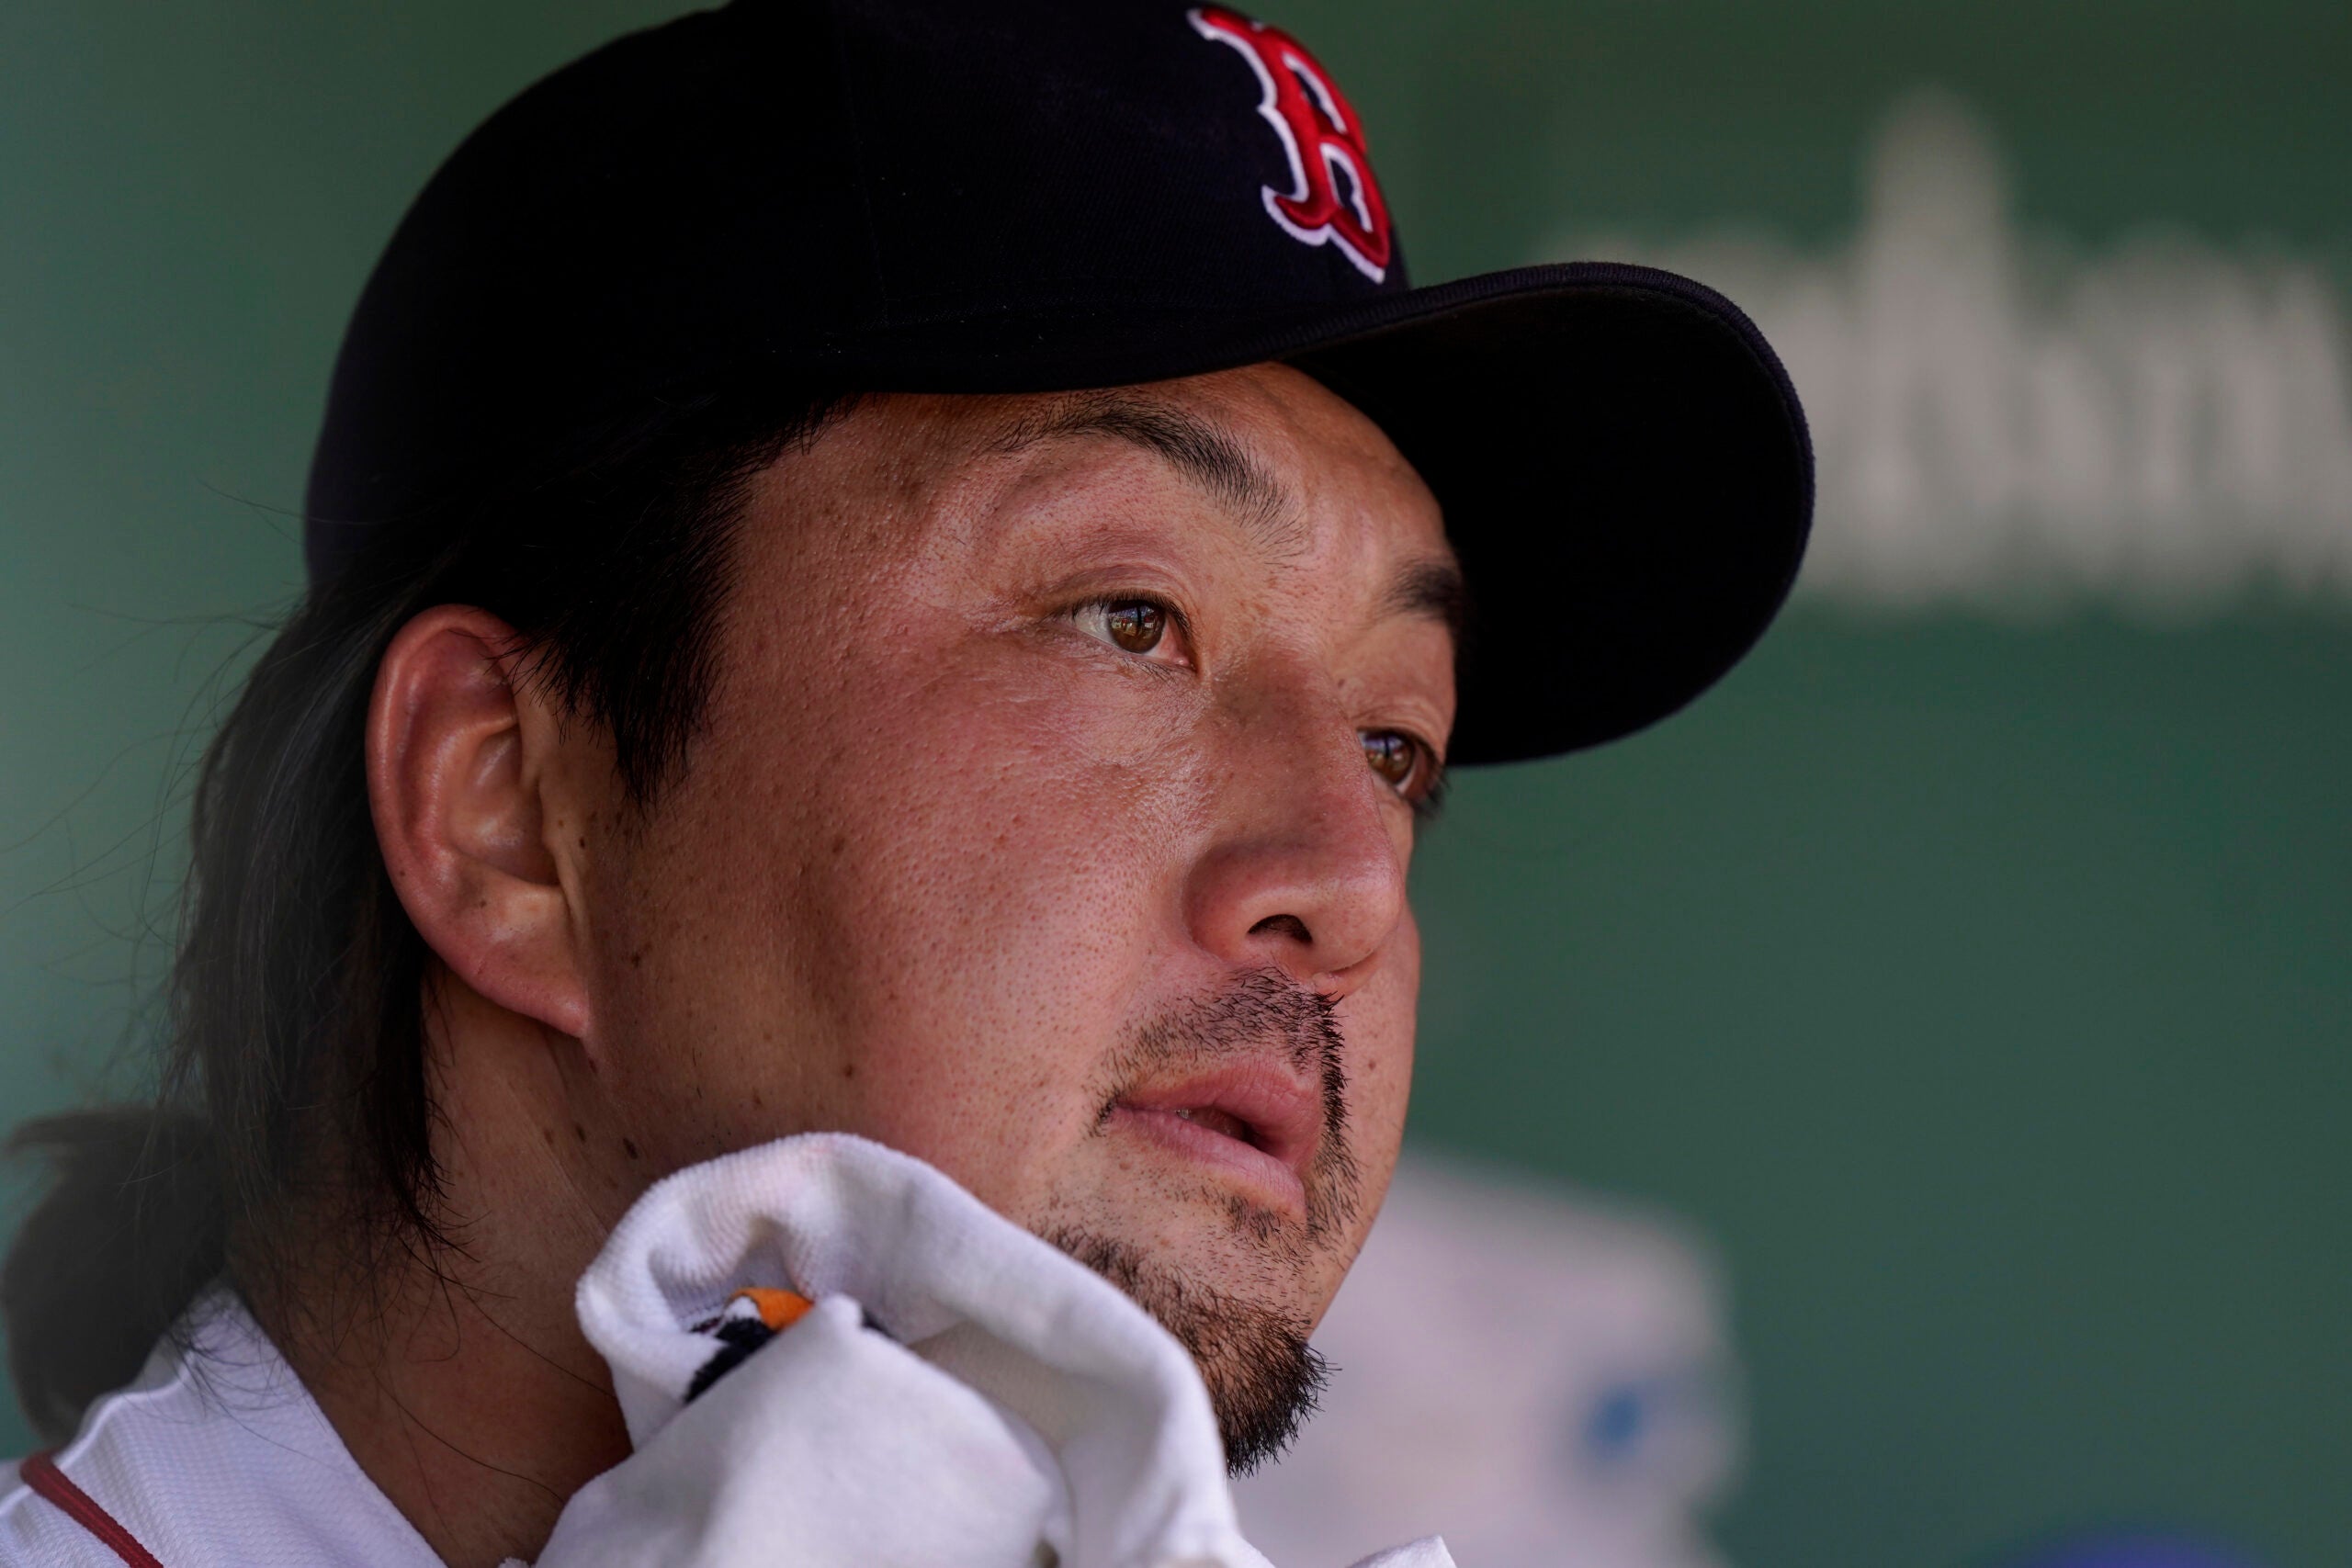 Hirokazu Sawamura looks on exasperated from the Red Sox dugout.